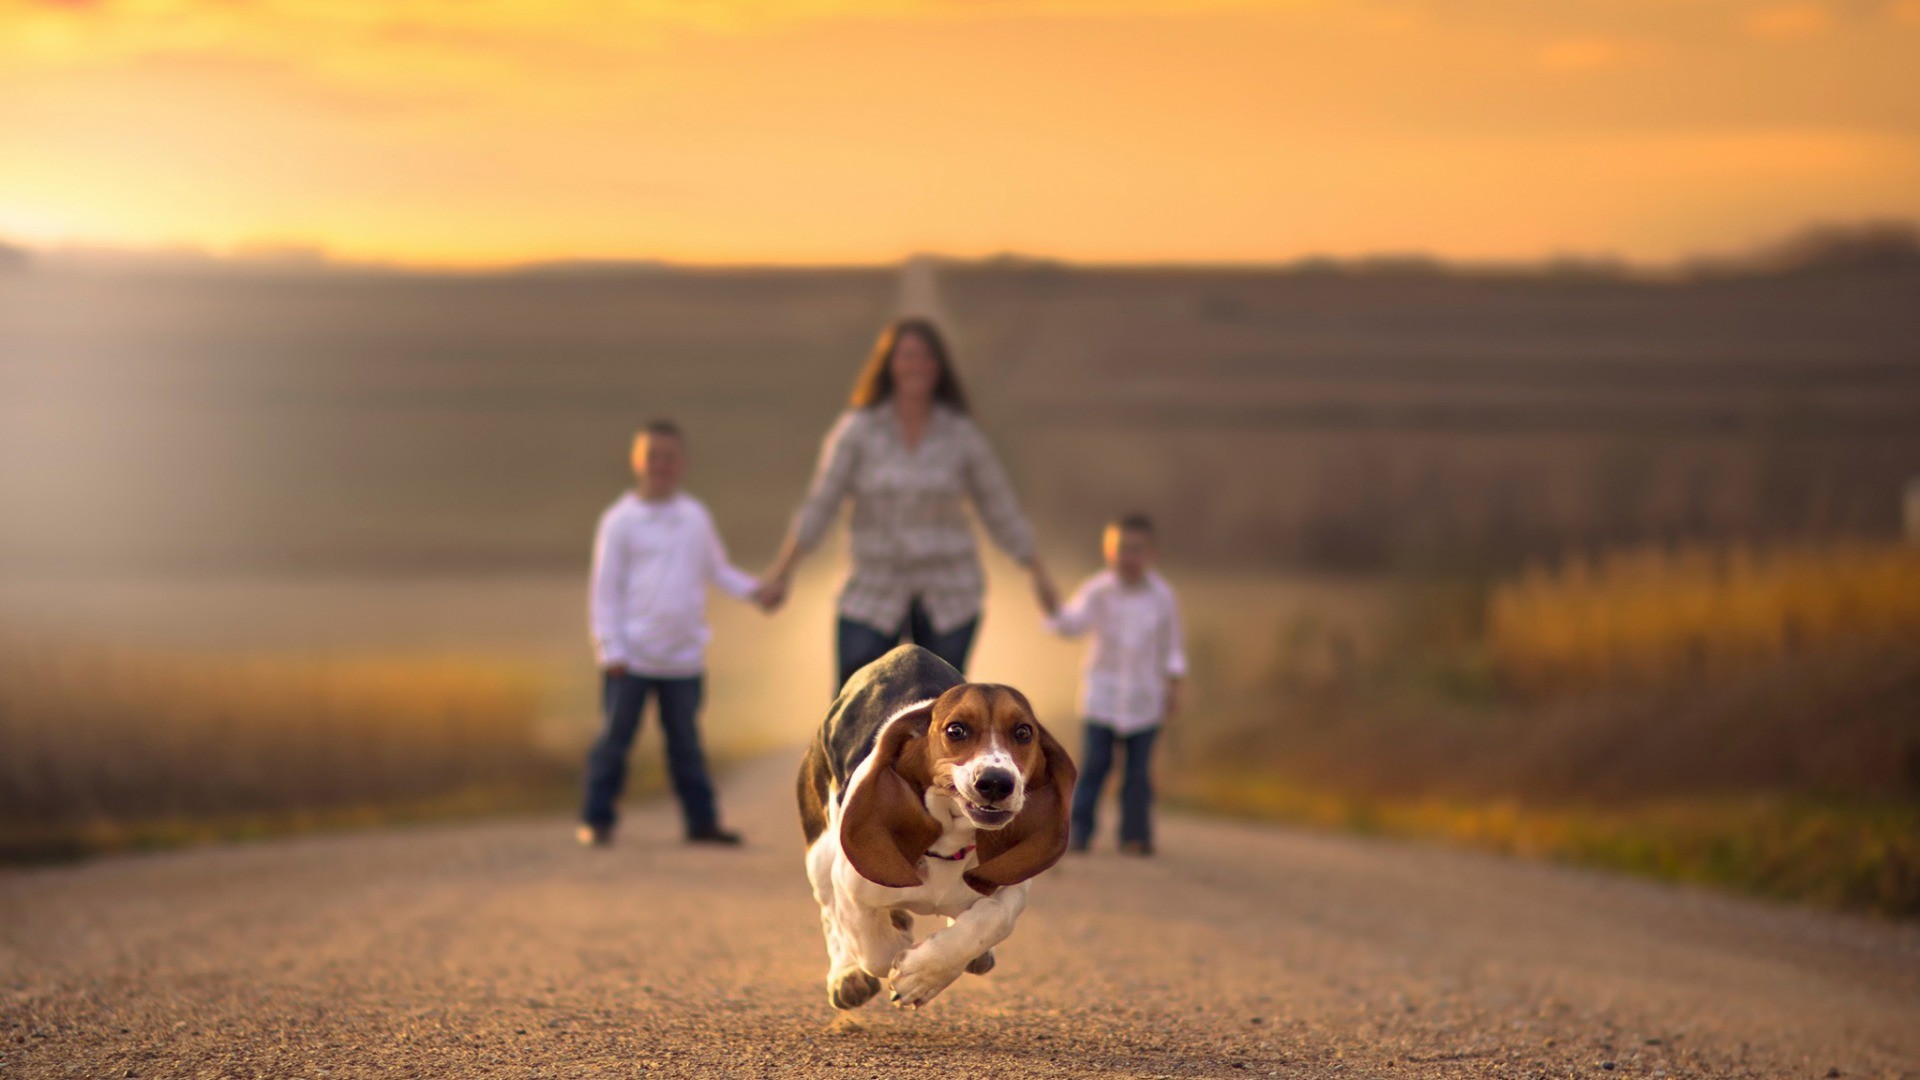 People 1920x1080 family road holding hands depth of field dog animals running Beagles Jake Olson frontal view mammals outdoors